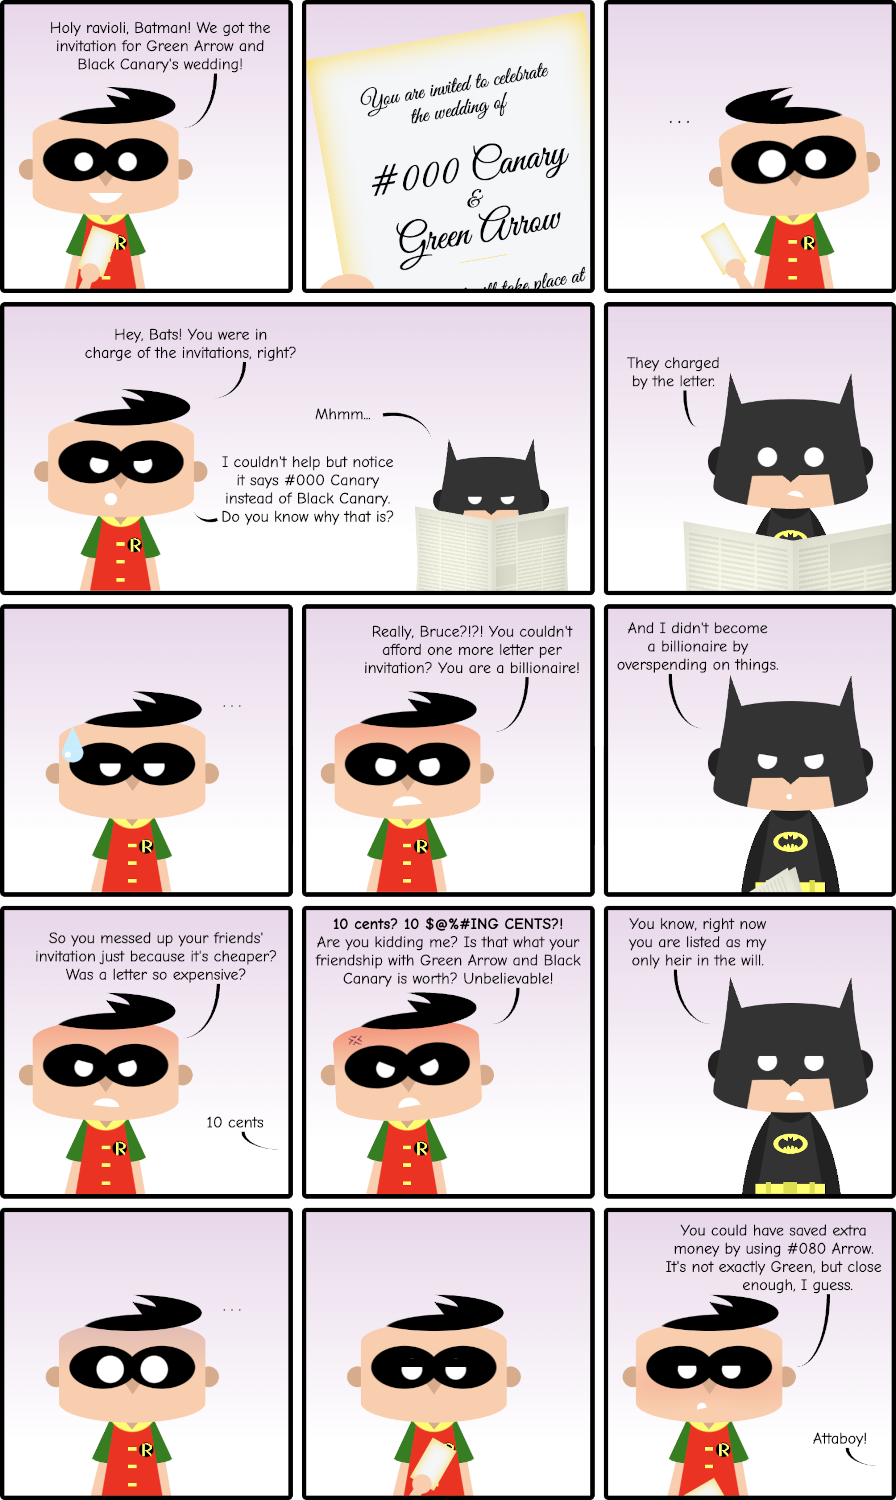 Cartoon with multiple panels showing Robin and Batman fighting over Batman being a penny pincher and writing #000 Canary instead of Black Canary in some wedding invitations in order to save money.